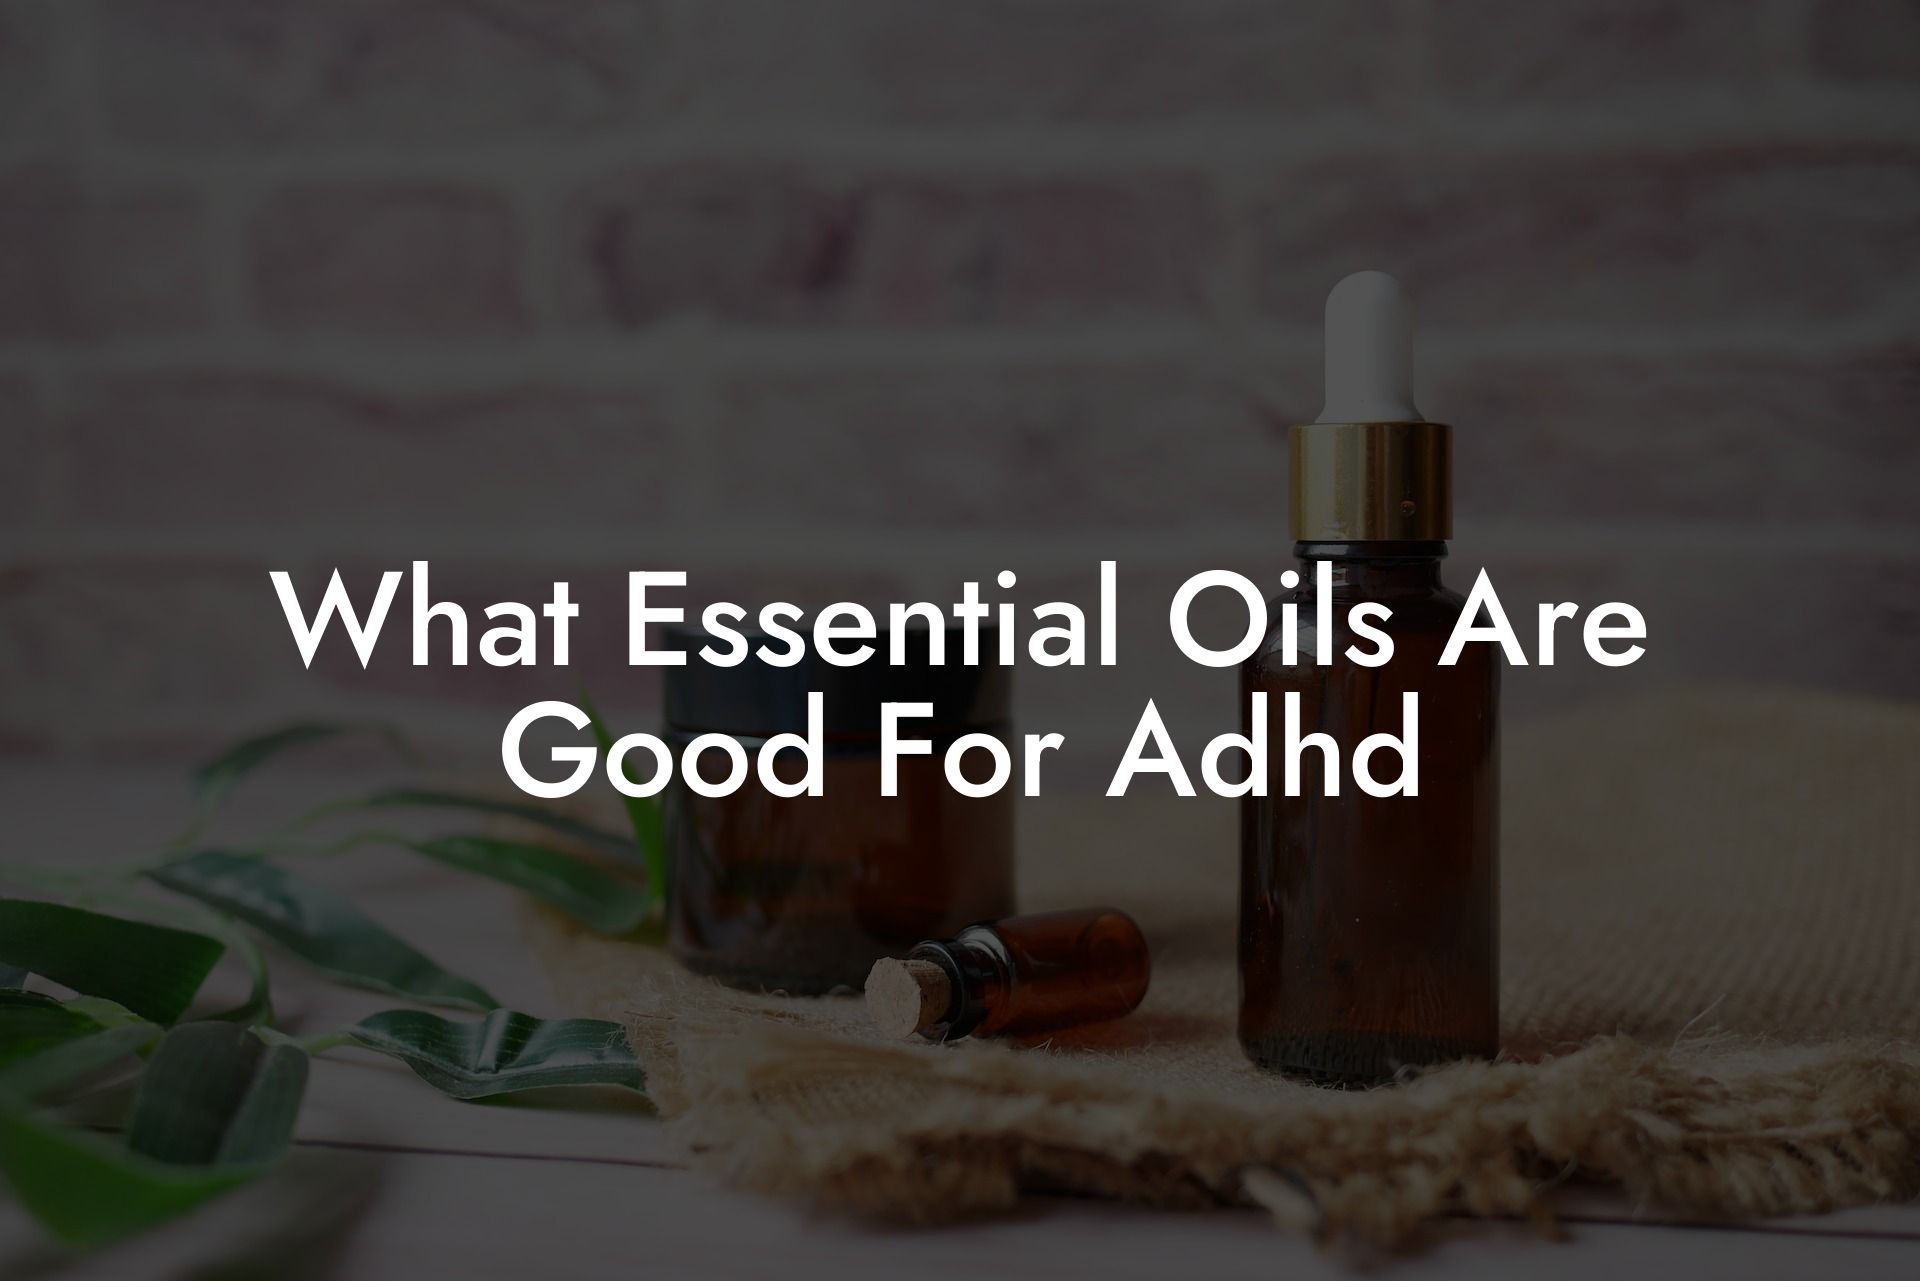 What Essential Oils Are Good For Adhd